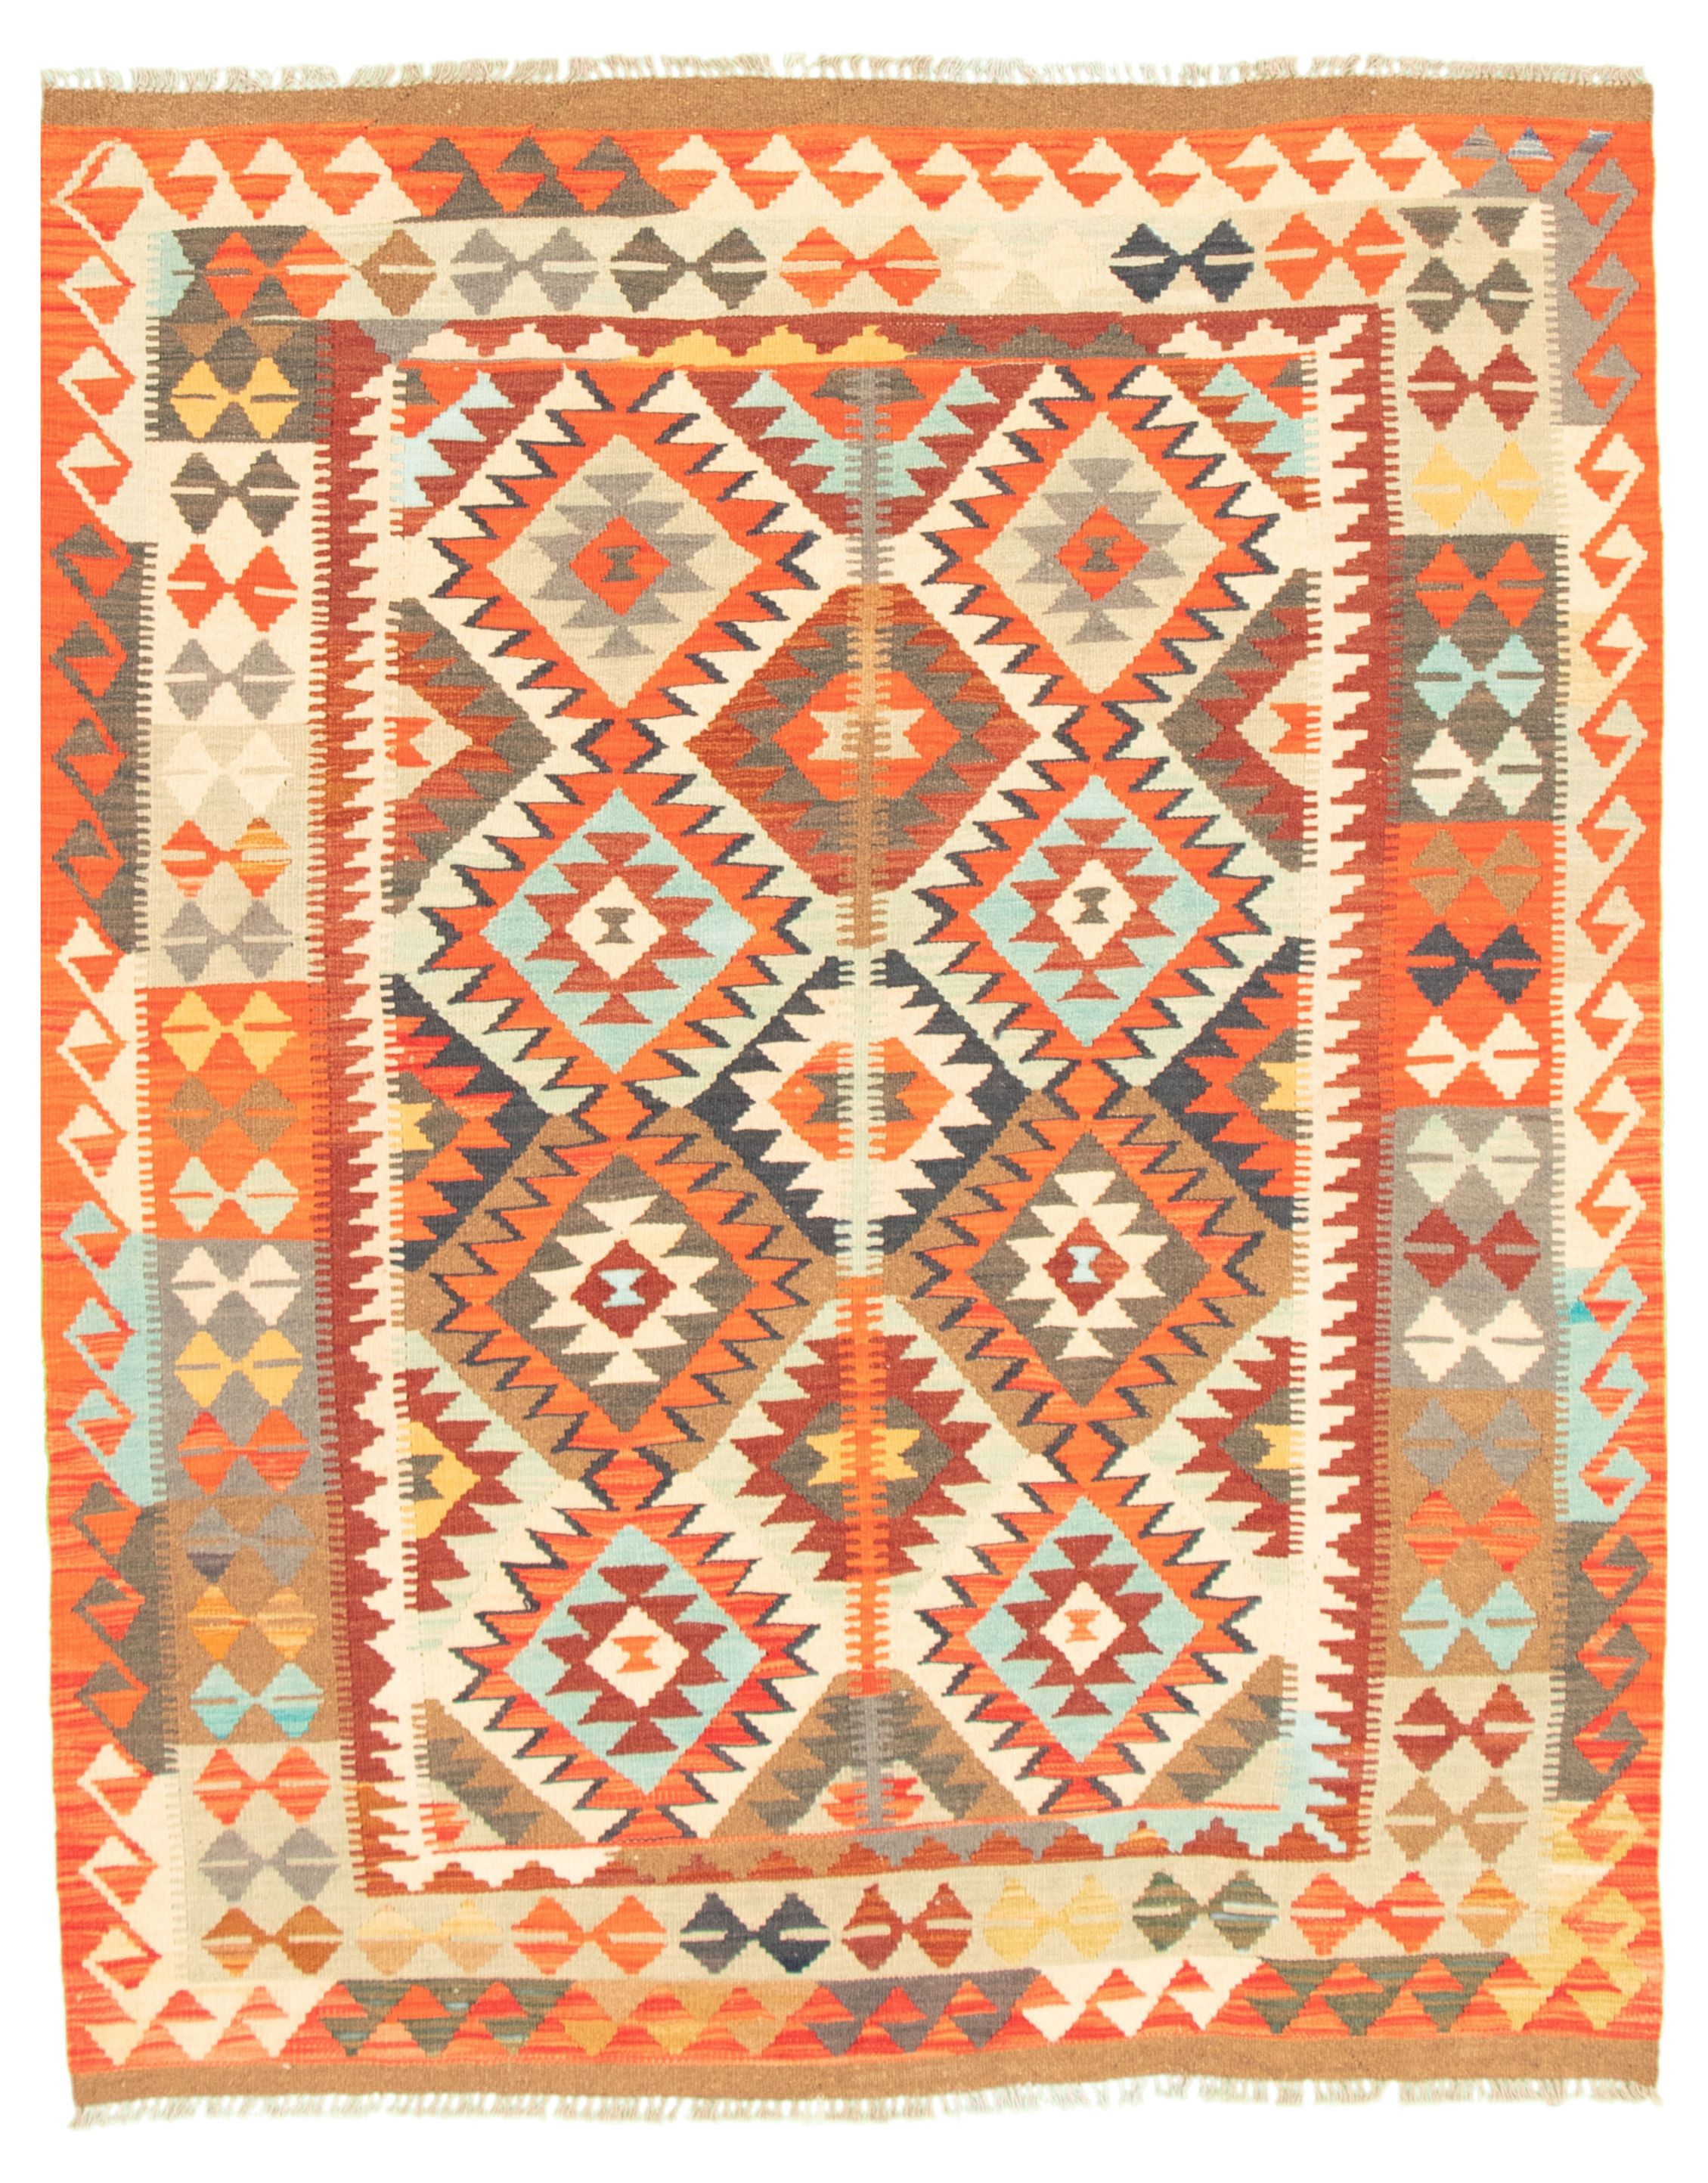 Hand woven Bold and Colorful  Cream Wool Kilim 5'5" x 6'8" Size: 5'5" x 6'8"  